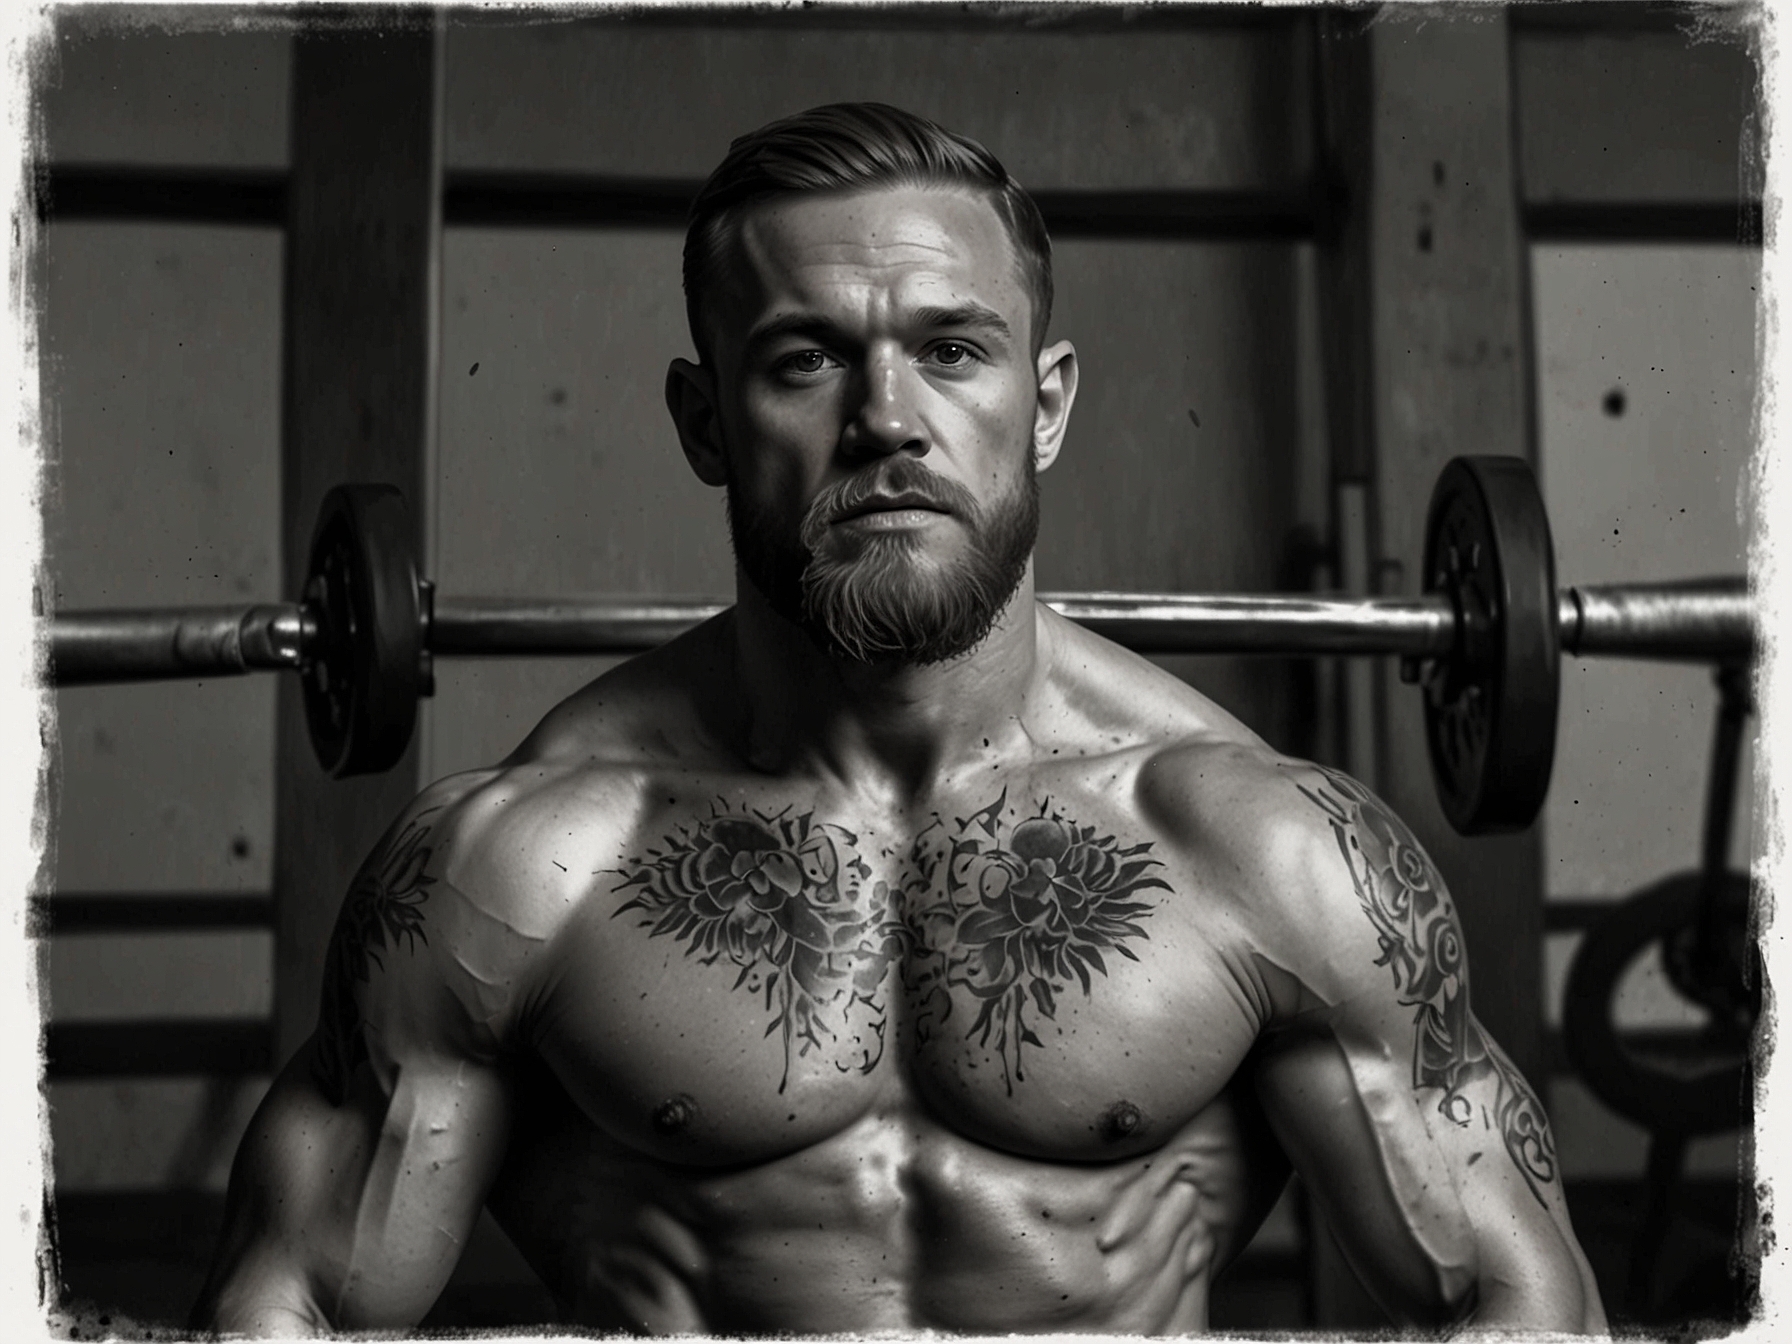 Conor McGregor in a determined pose in the gym, symbolizing his commitment to recover and return to the UFC. He is seen engaging in rigorous physiotherapy and training routines.